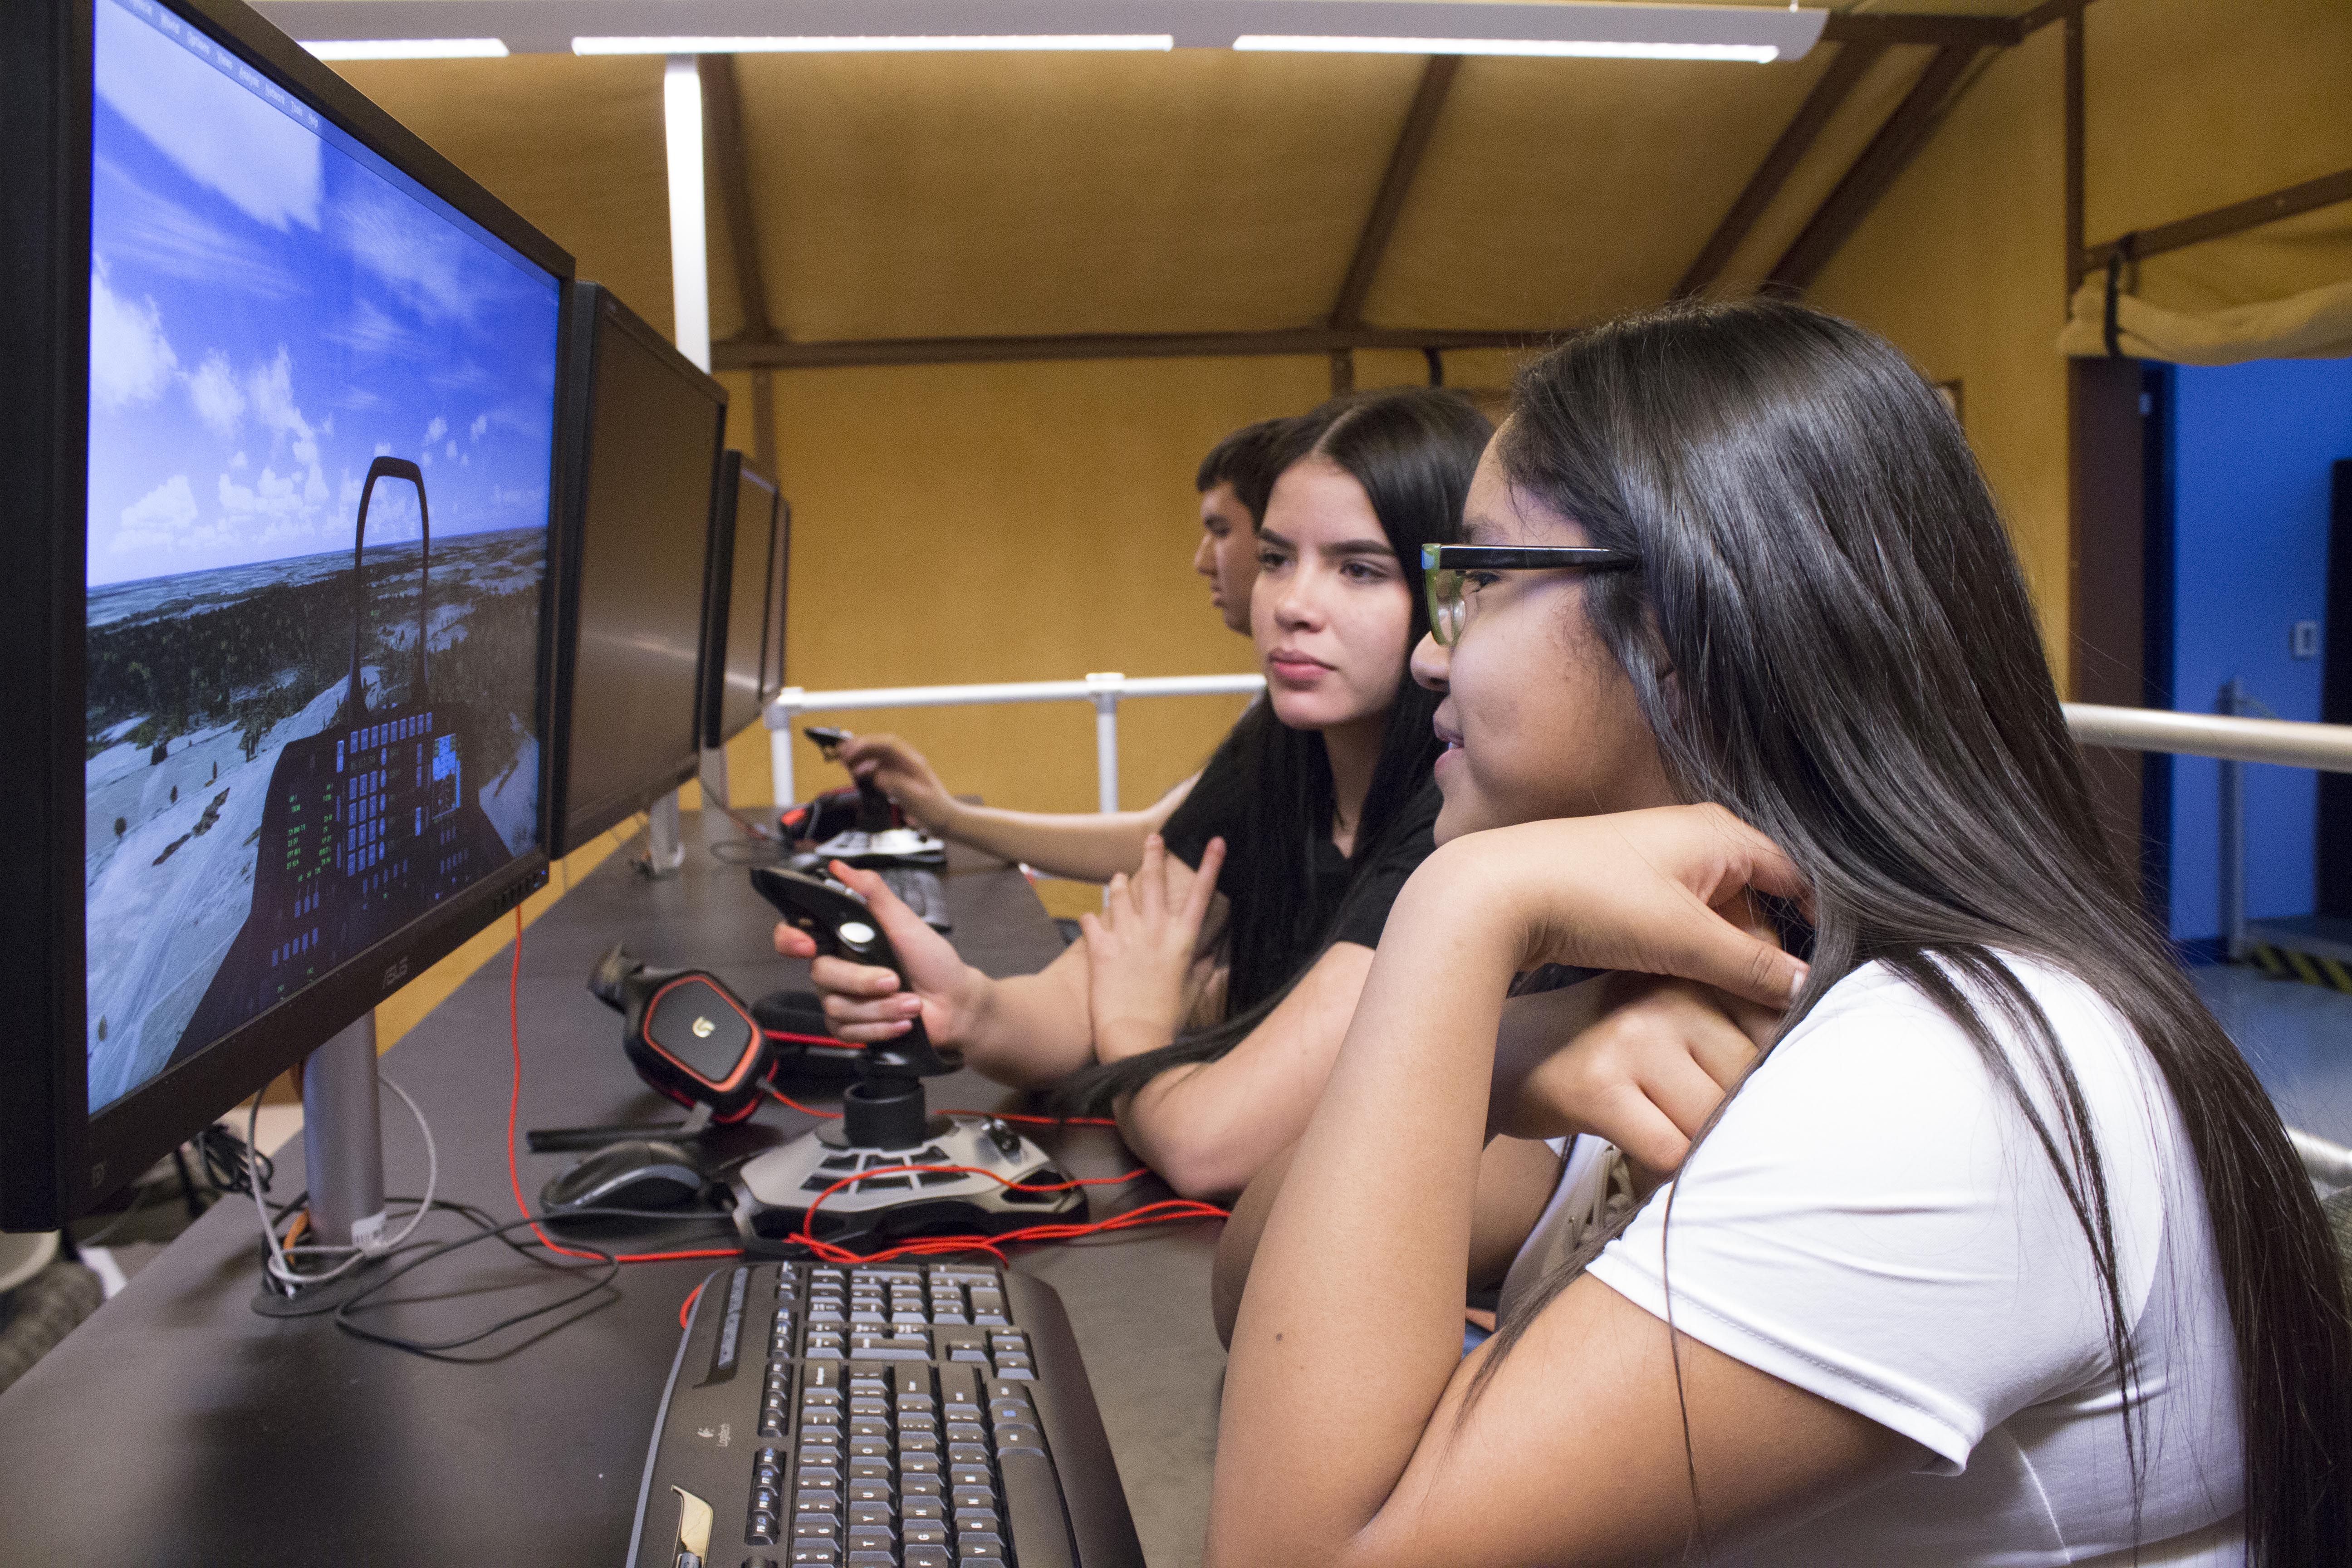 Local middle school students use flight simulators to learn STEM concepts